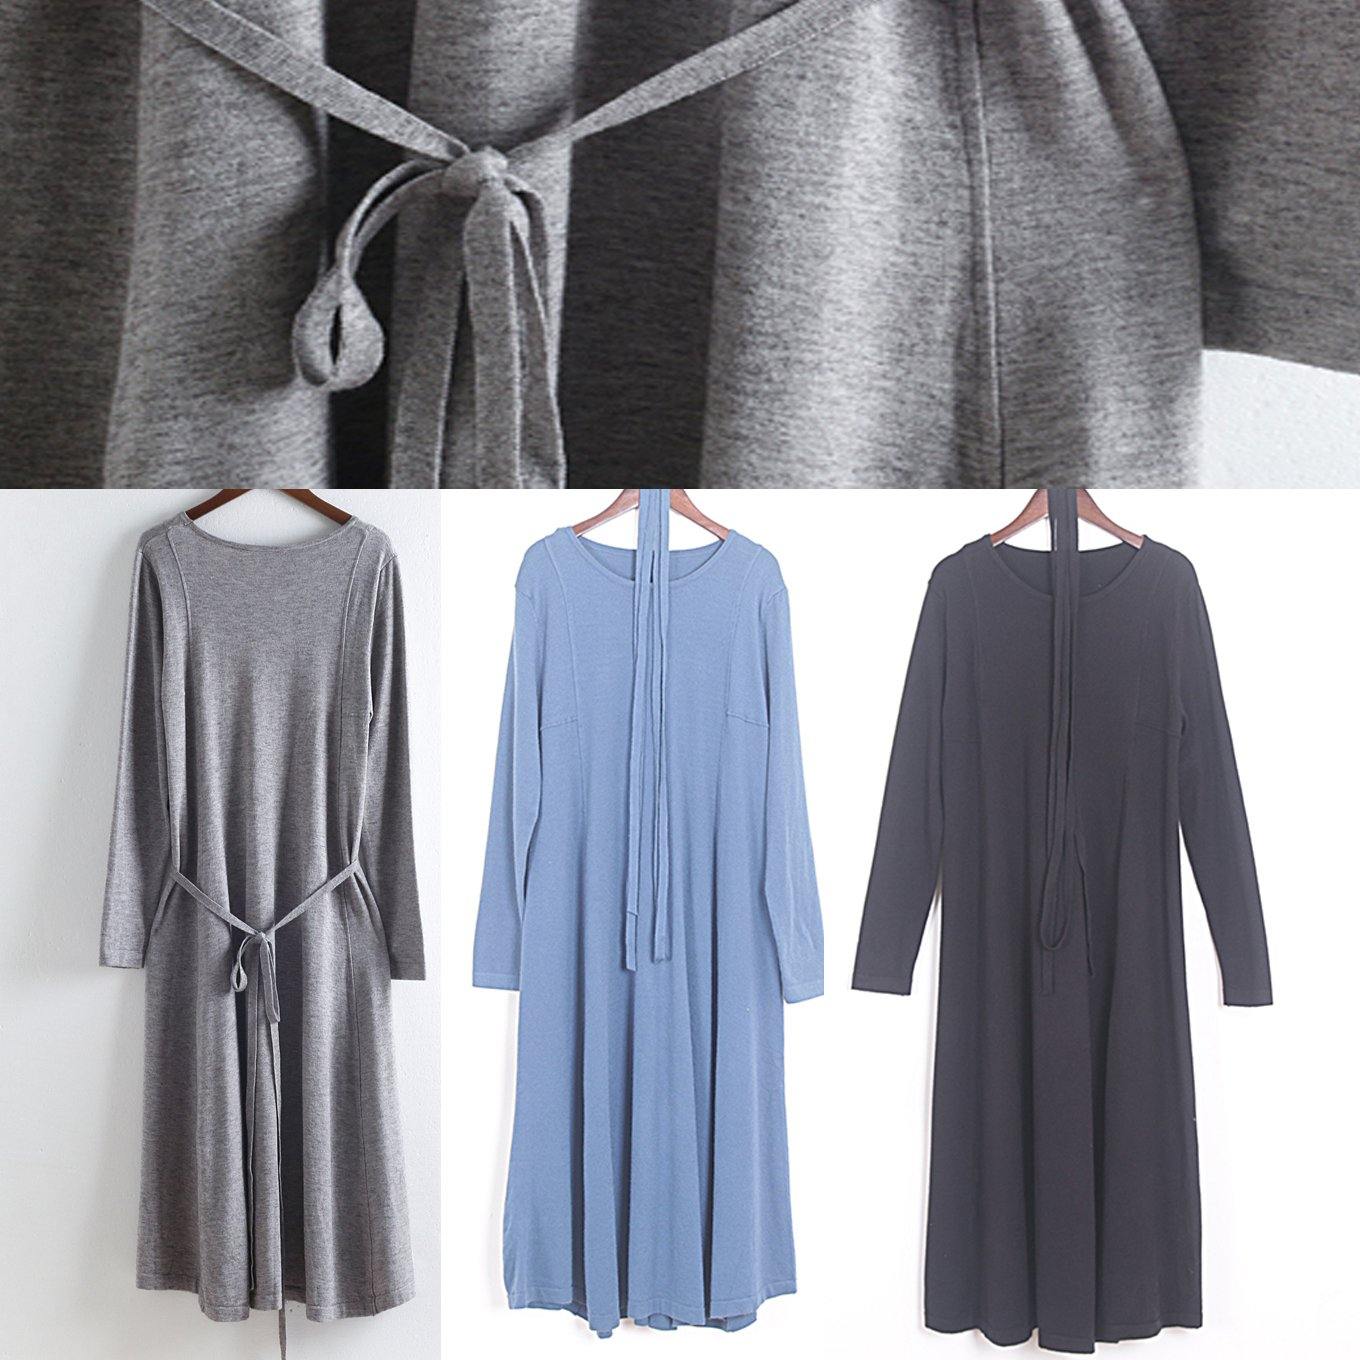 vintage gray knit dresses oversized o neck spring dresses boutique tie waist pullover sweater - Omychic